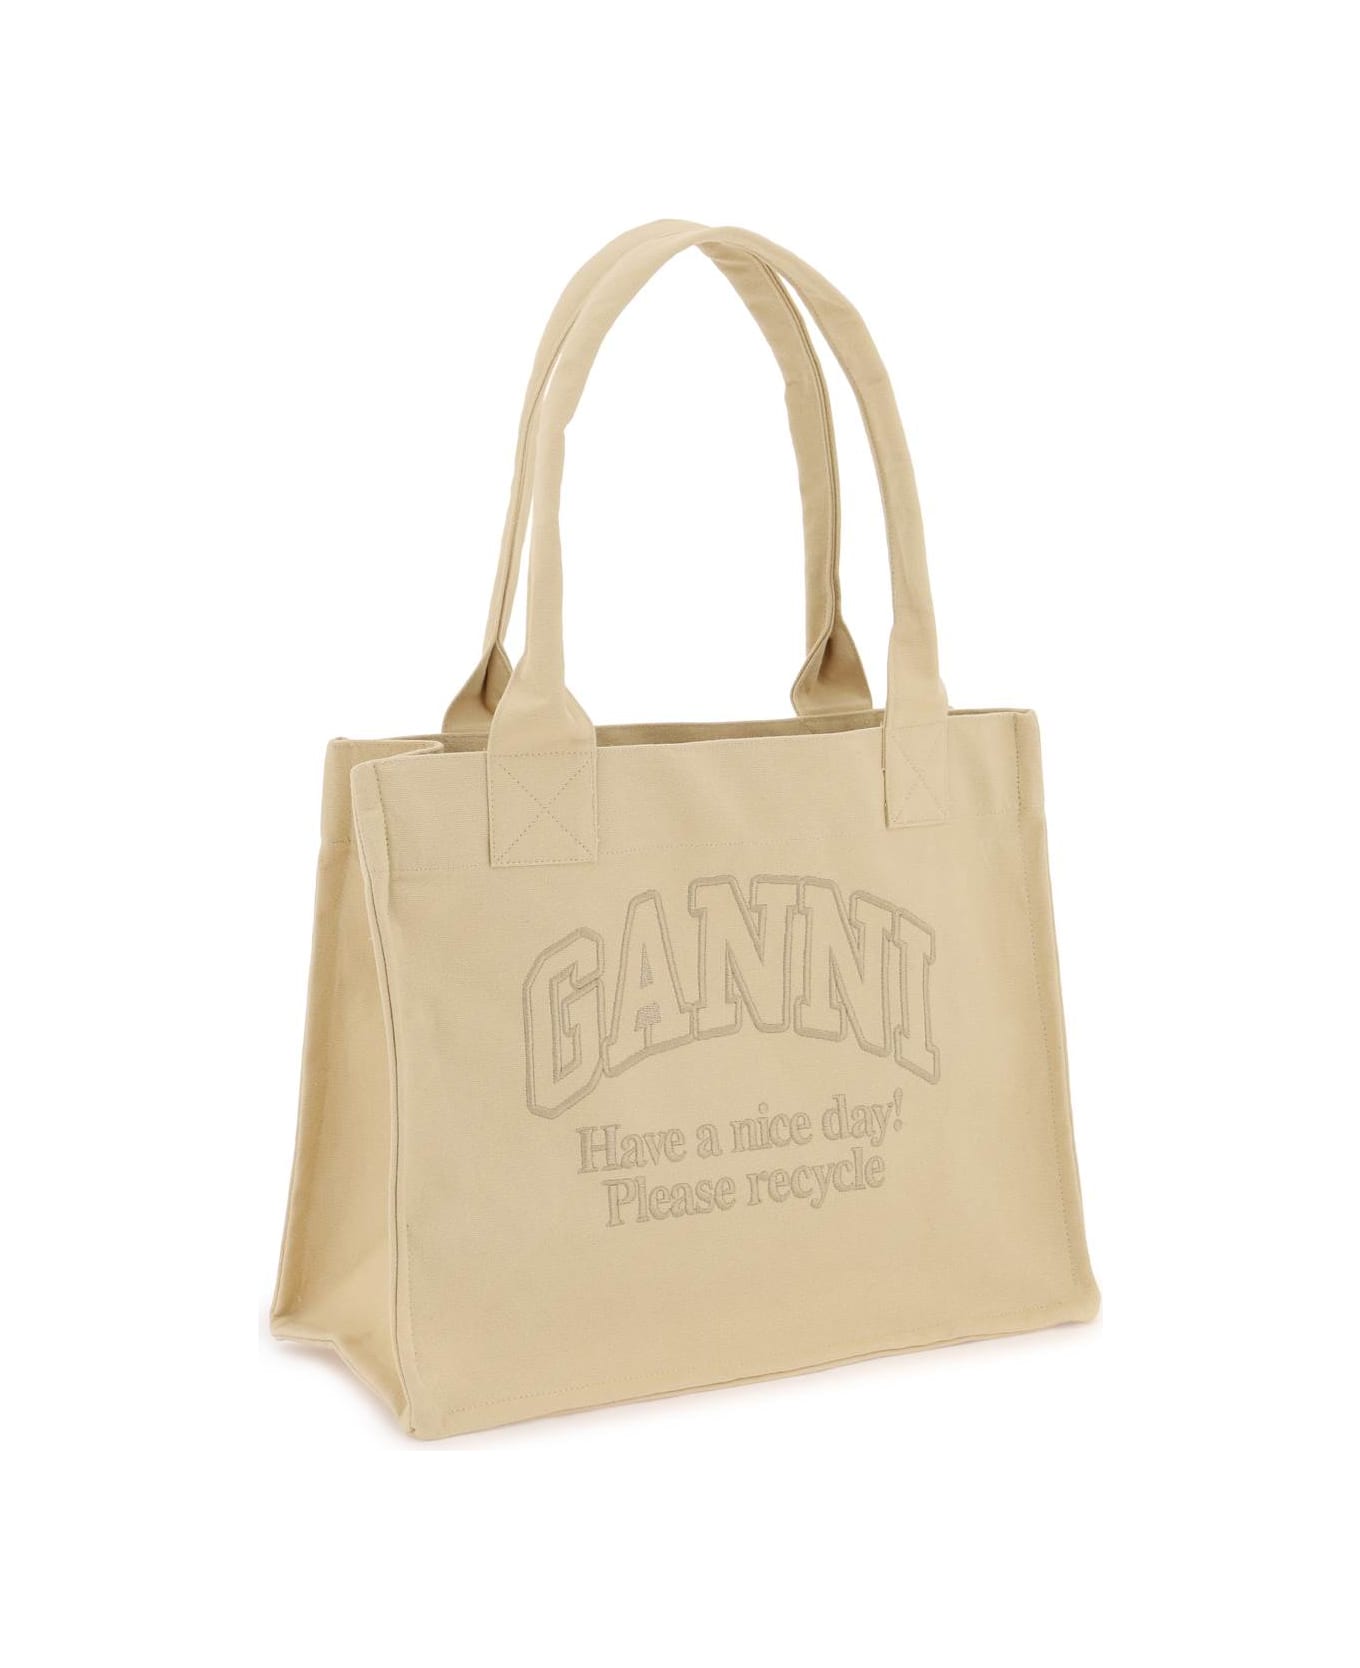 Ganni Tote Bag With Embroidery - BUTTERCREAM (Beige)